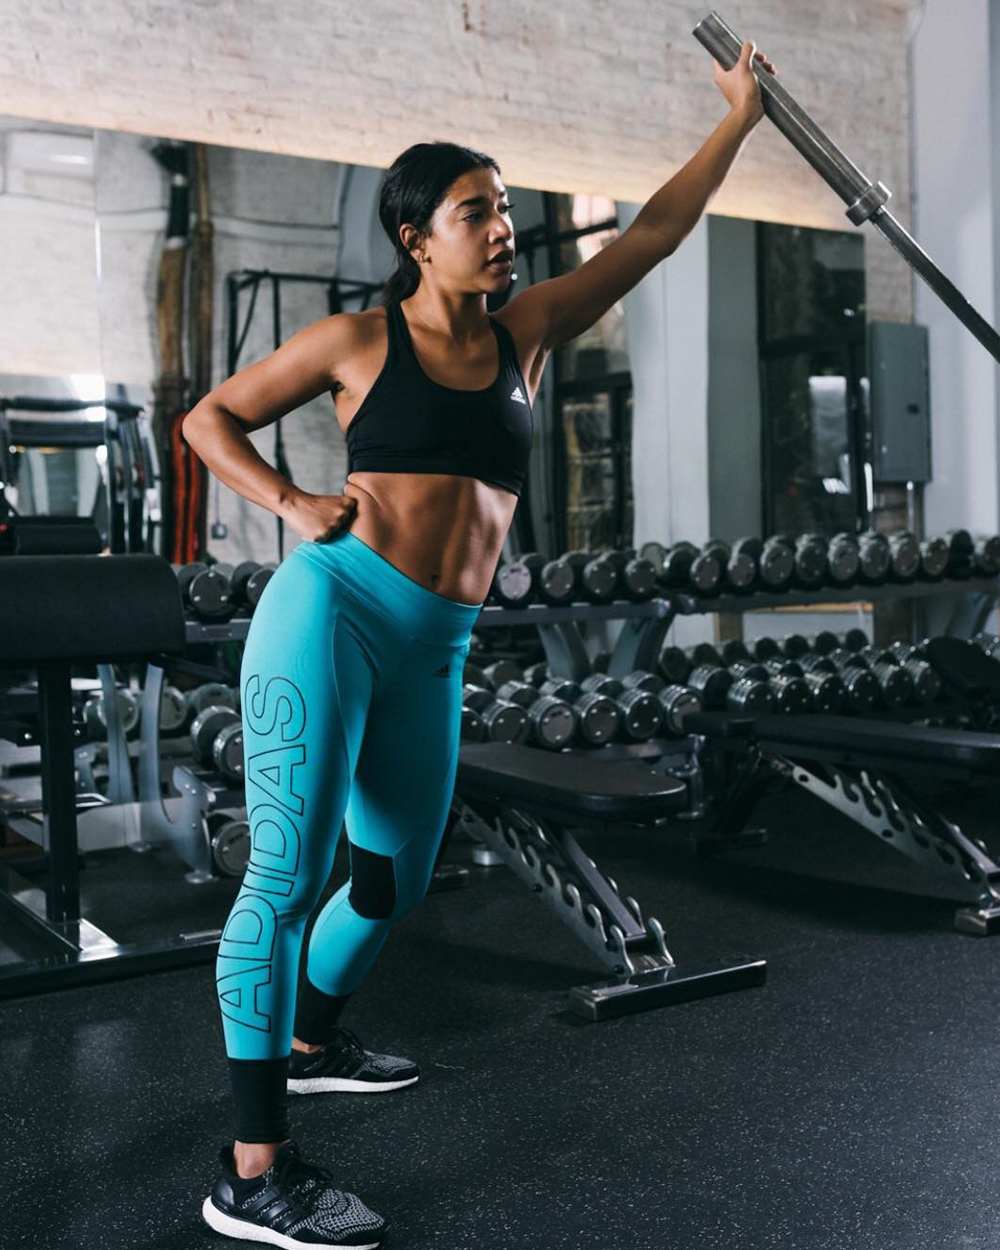 This is the main reason women are working out - and it's not because they  love it